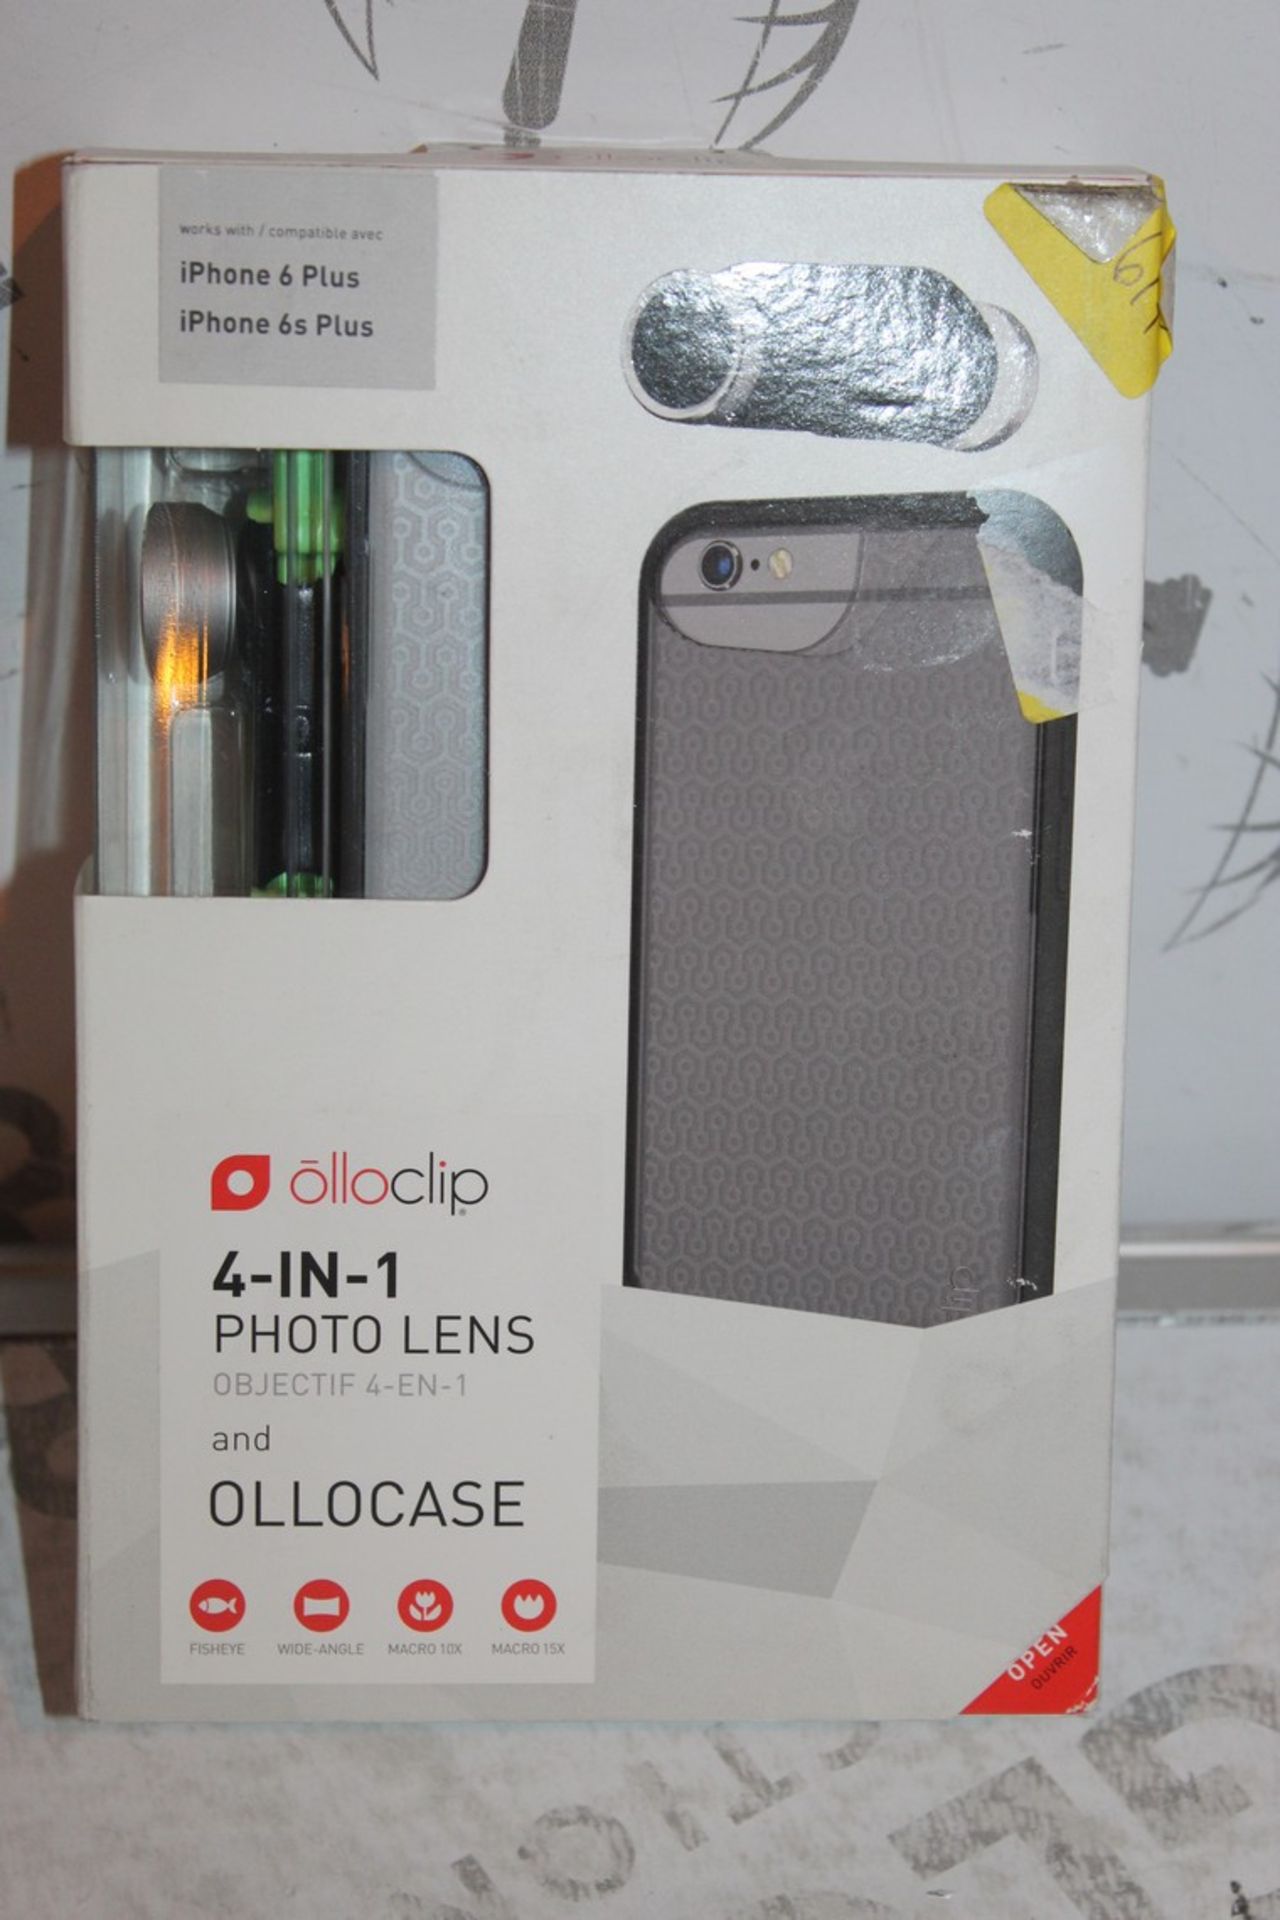 Lot to Contain 2 Boxed Brand New Iphone 6+ and 6S+ Ollo Clip 4in1 Lense Cases Combined RRP £120